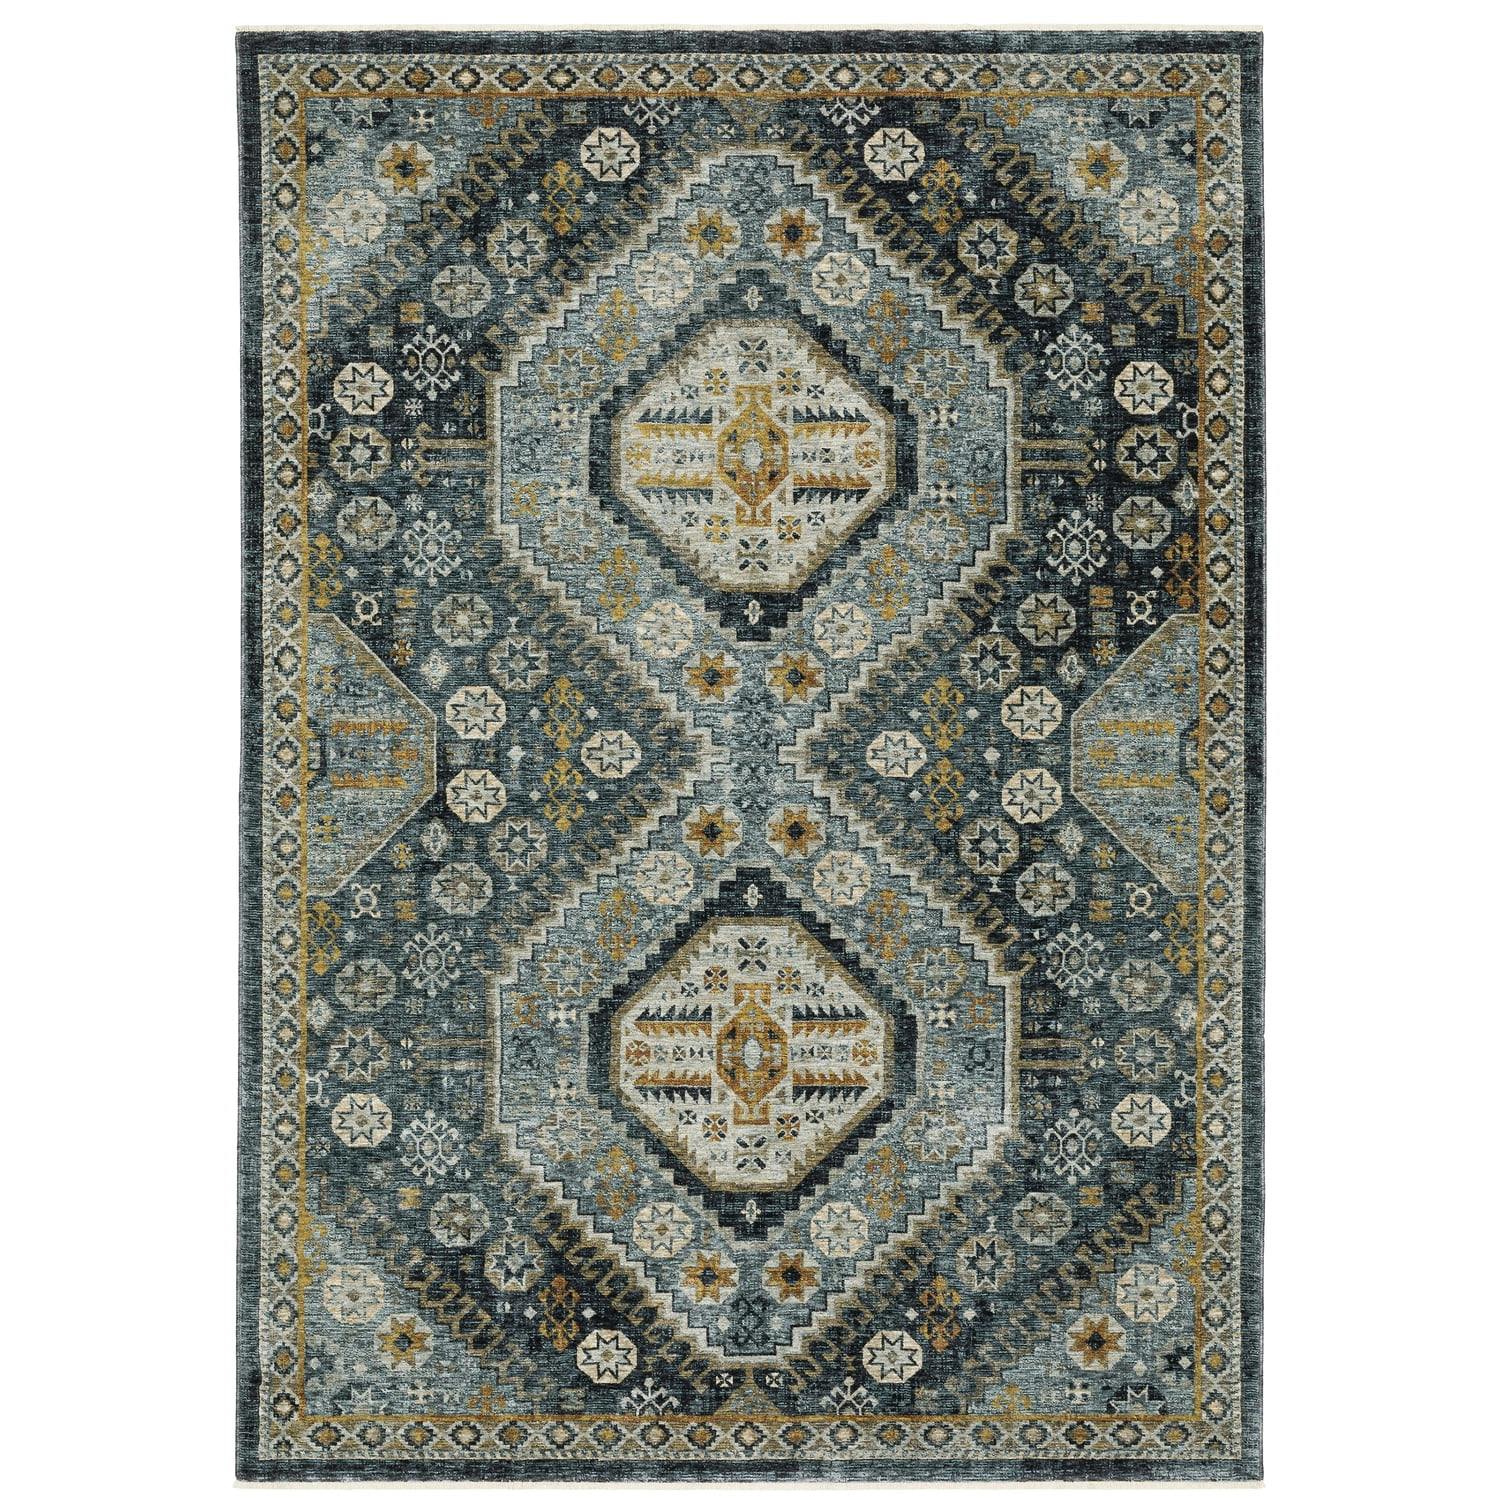 Bohemian Bliss Blue Multi Wool-Synthetic Hand-Knotted Area Rug